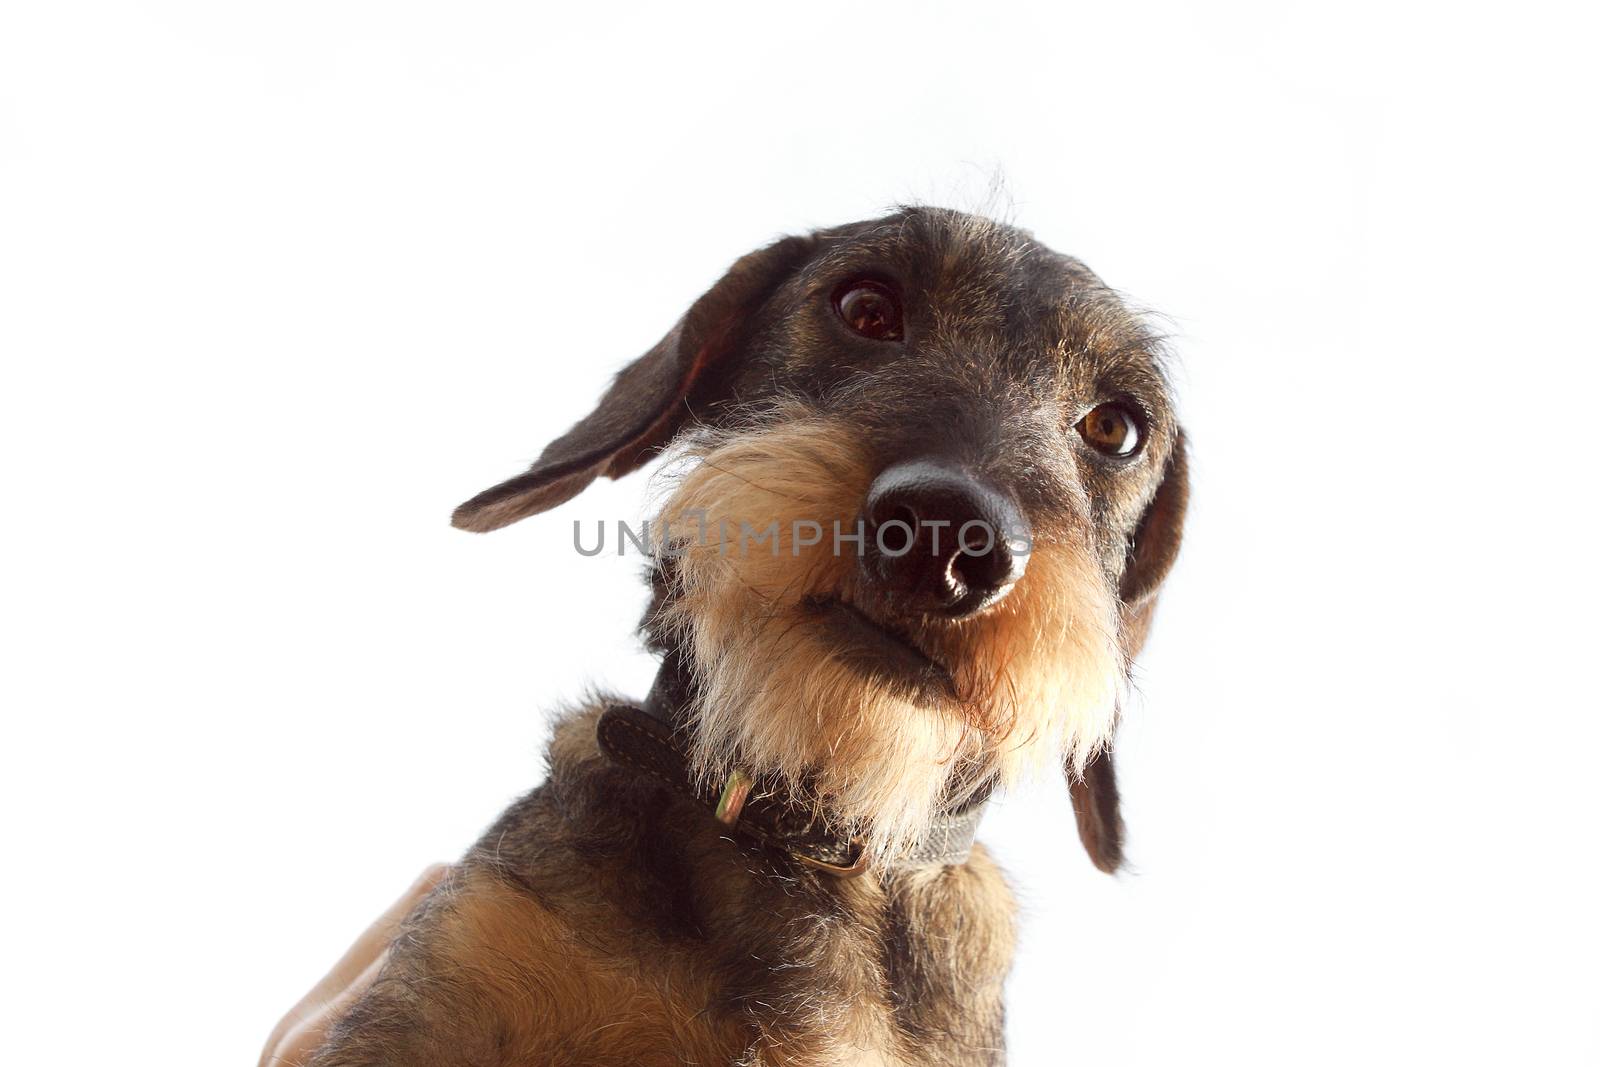 wirehaired dachshund dog on white background close up by cococinema